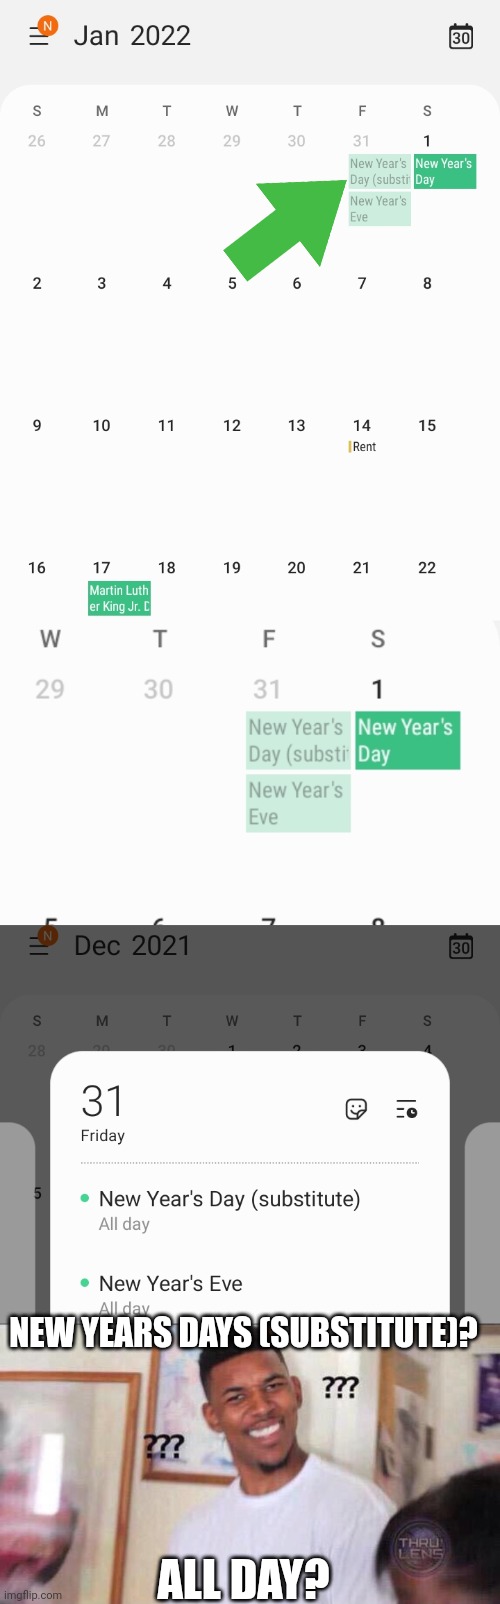 WHO IN THE WORLD WOULD CELEBRATE "NEW YEARS DAY" ON NEW YEARS EVE??? | NEW YEARS DAYS (SUBSTITUTE)? ALL DAY? | image tagged in black guy confused,new years,new years eve,calendar,wtf | made w/ Imgflip meme maker